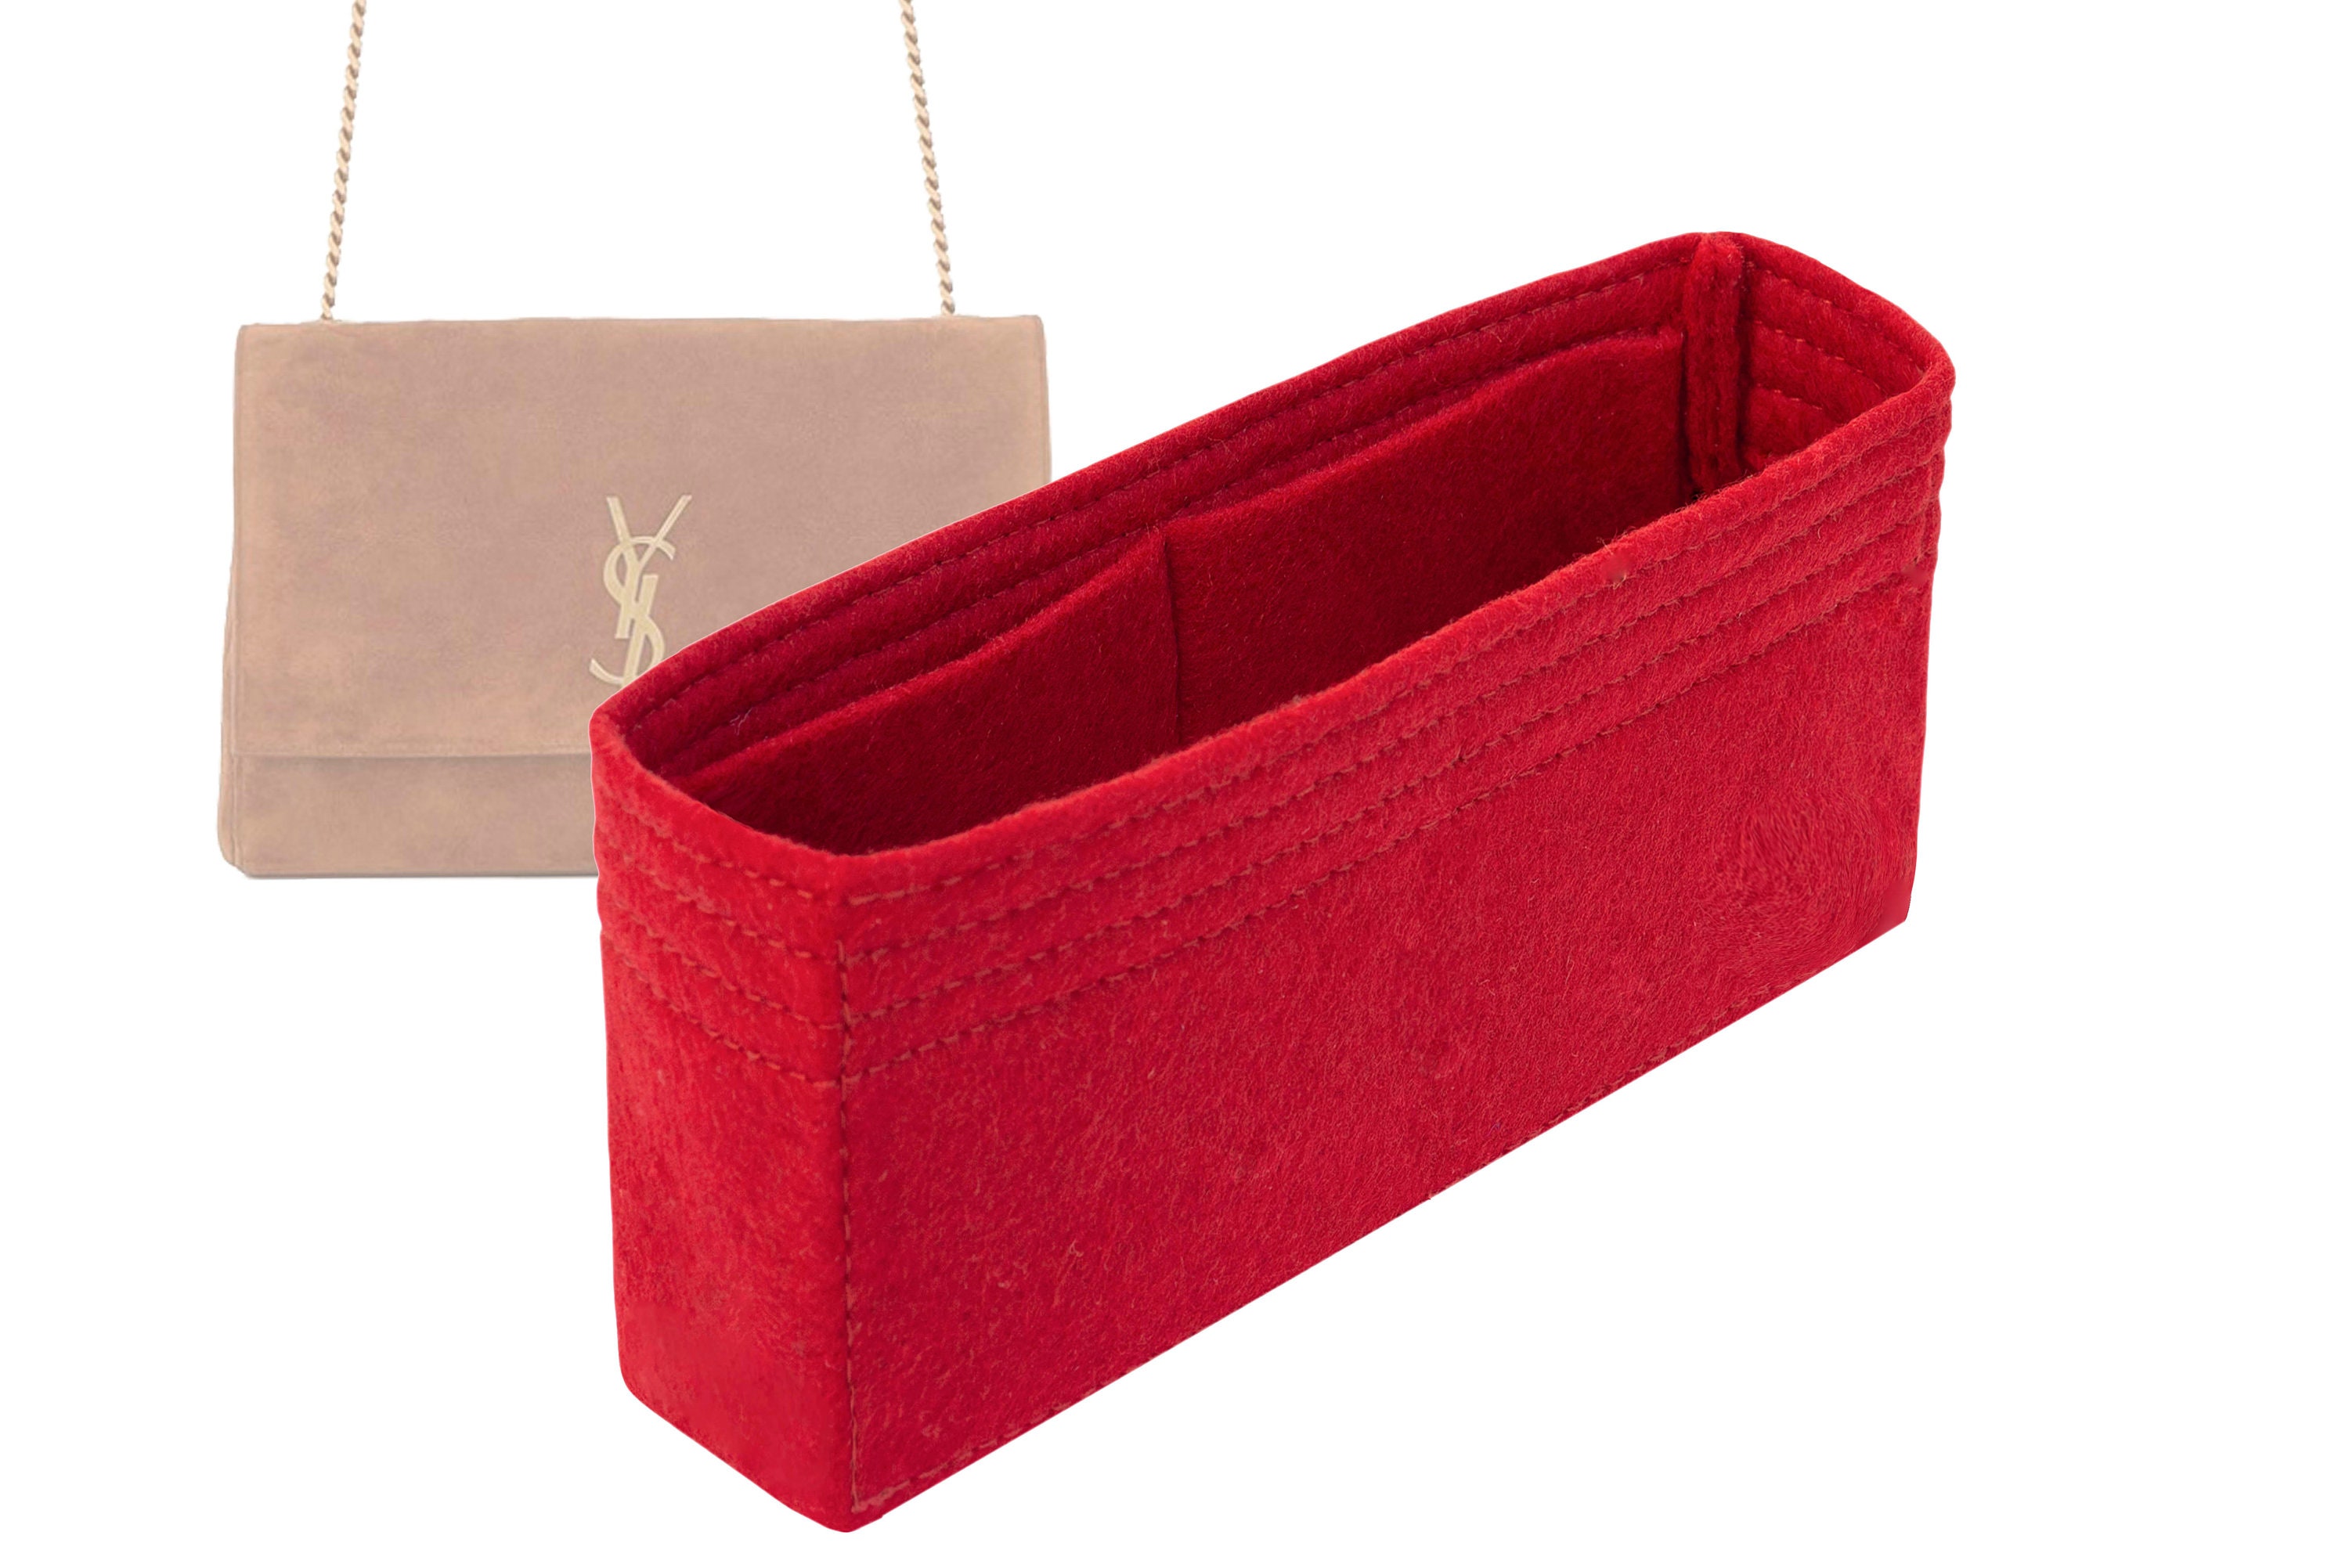 Saint Laurent Uptown pouch for Women - Red in Oman